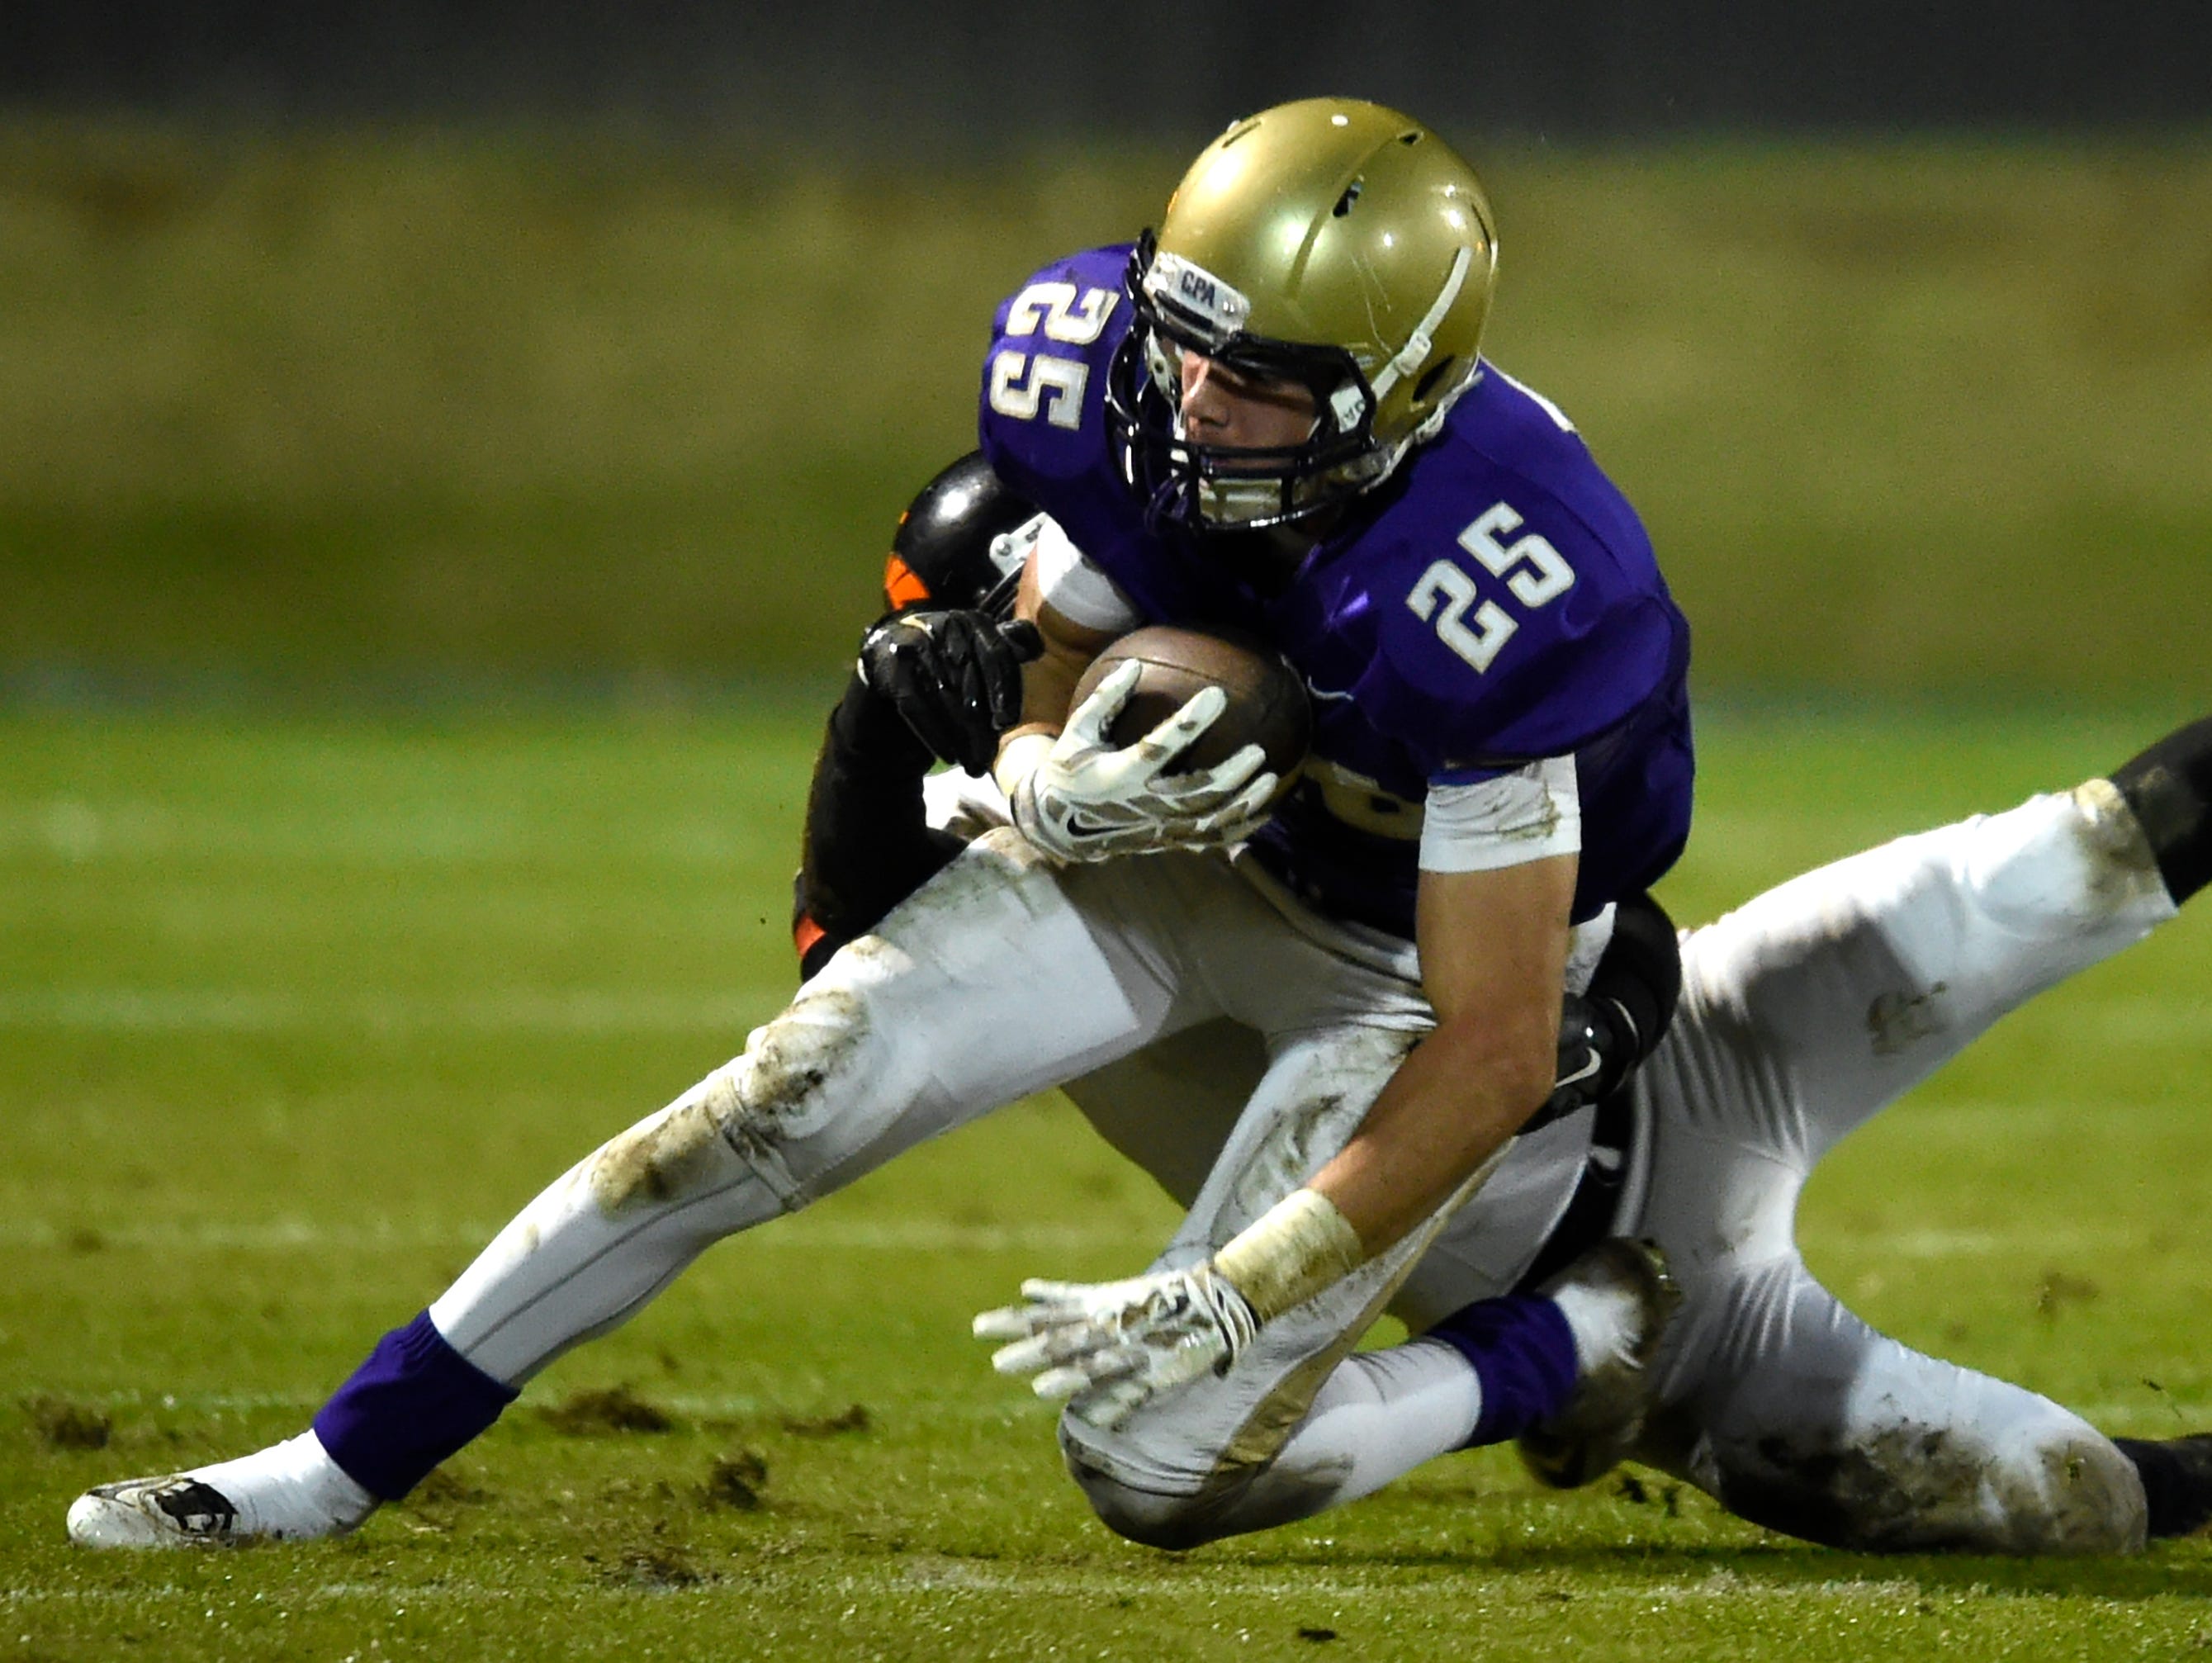 CPA running back Wallace Barrett (25) is pulled down by Startford's William Summers (5) as he runs the ball during their game Friday Nov. 13, 2015, in Nashville, Tenn.